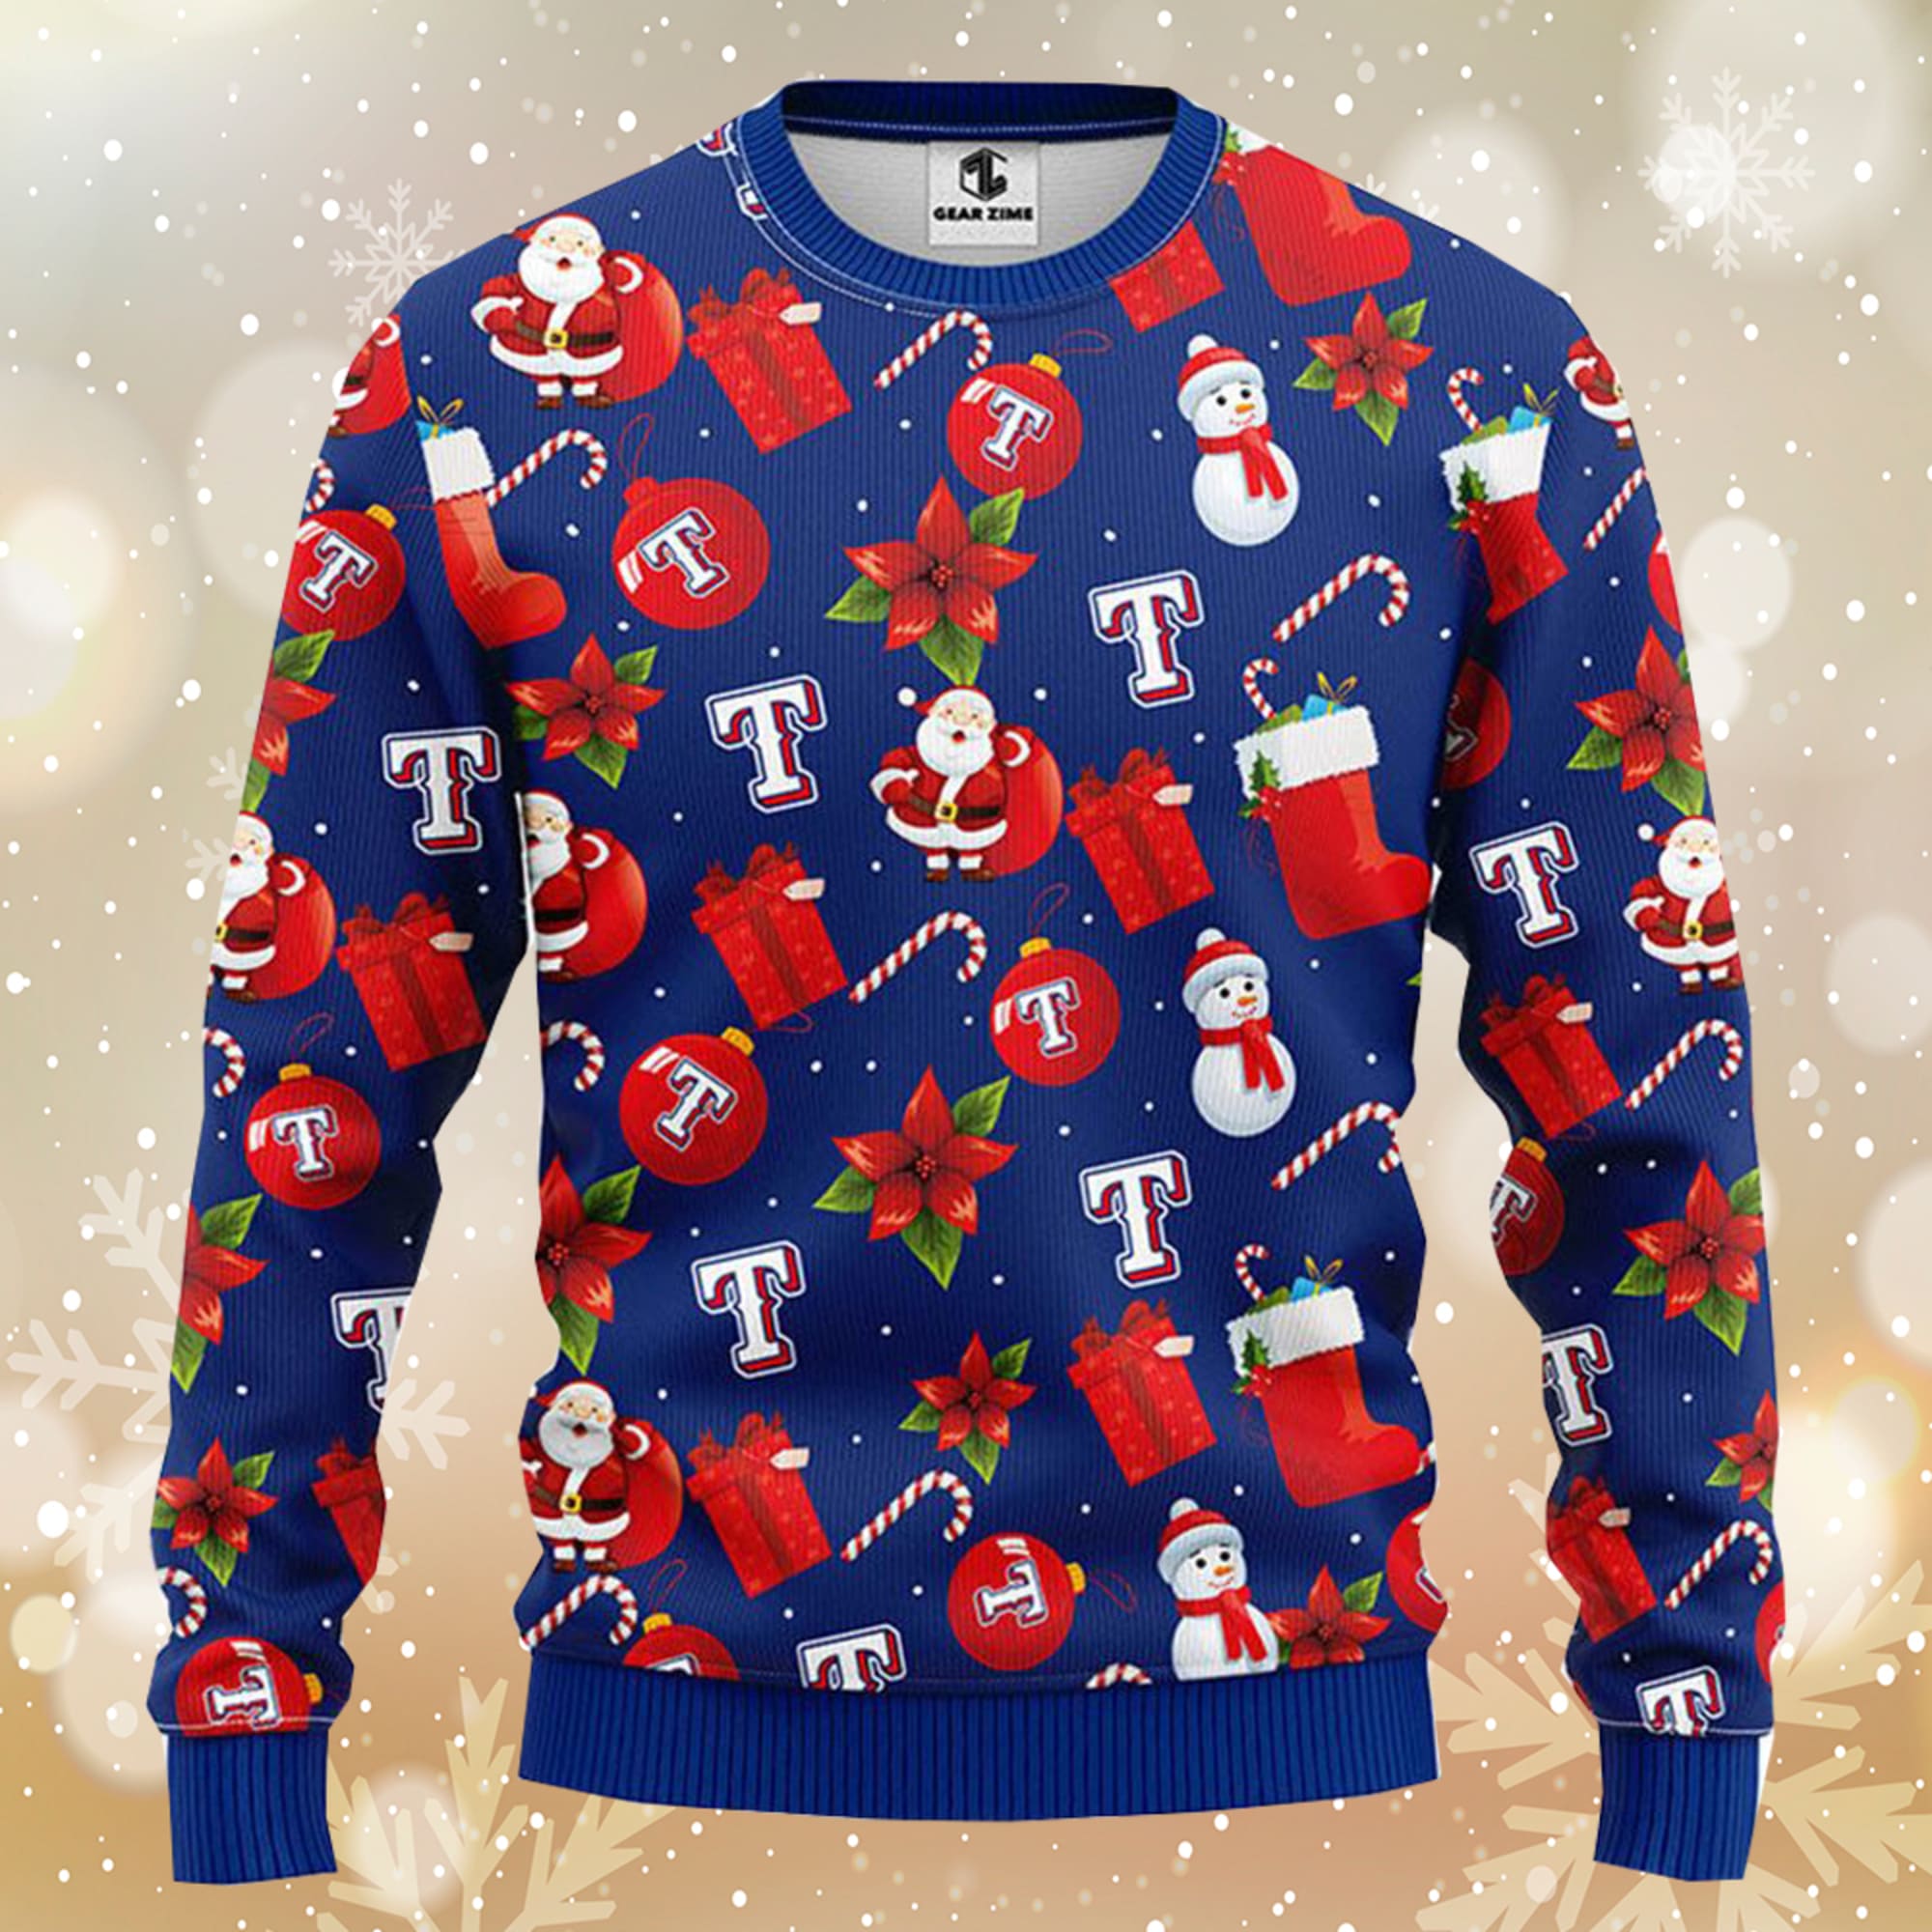 Texas Rangers Ugly Sweater - T-shirts Low Price